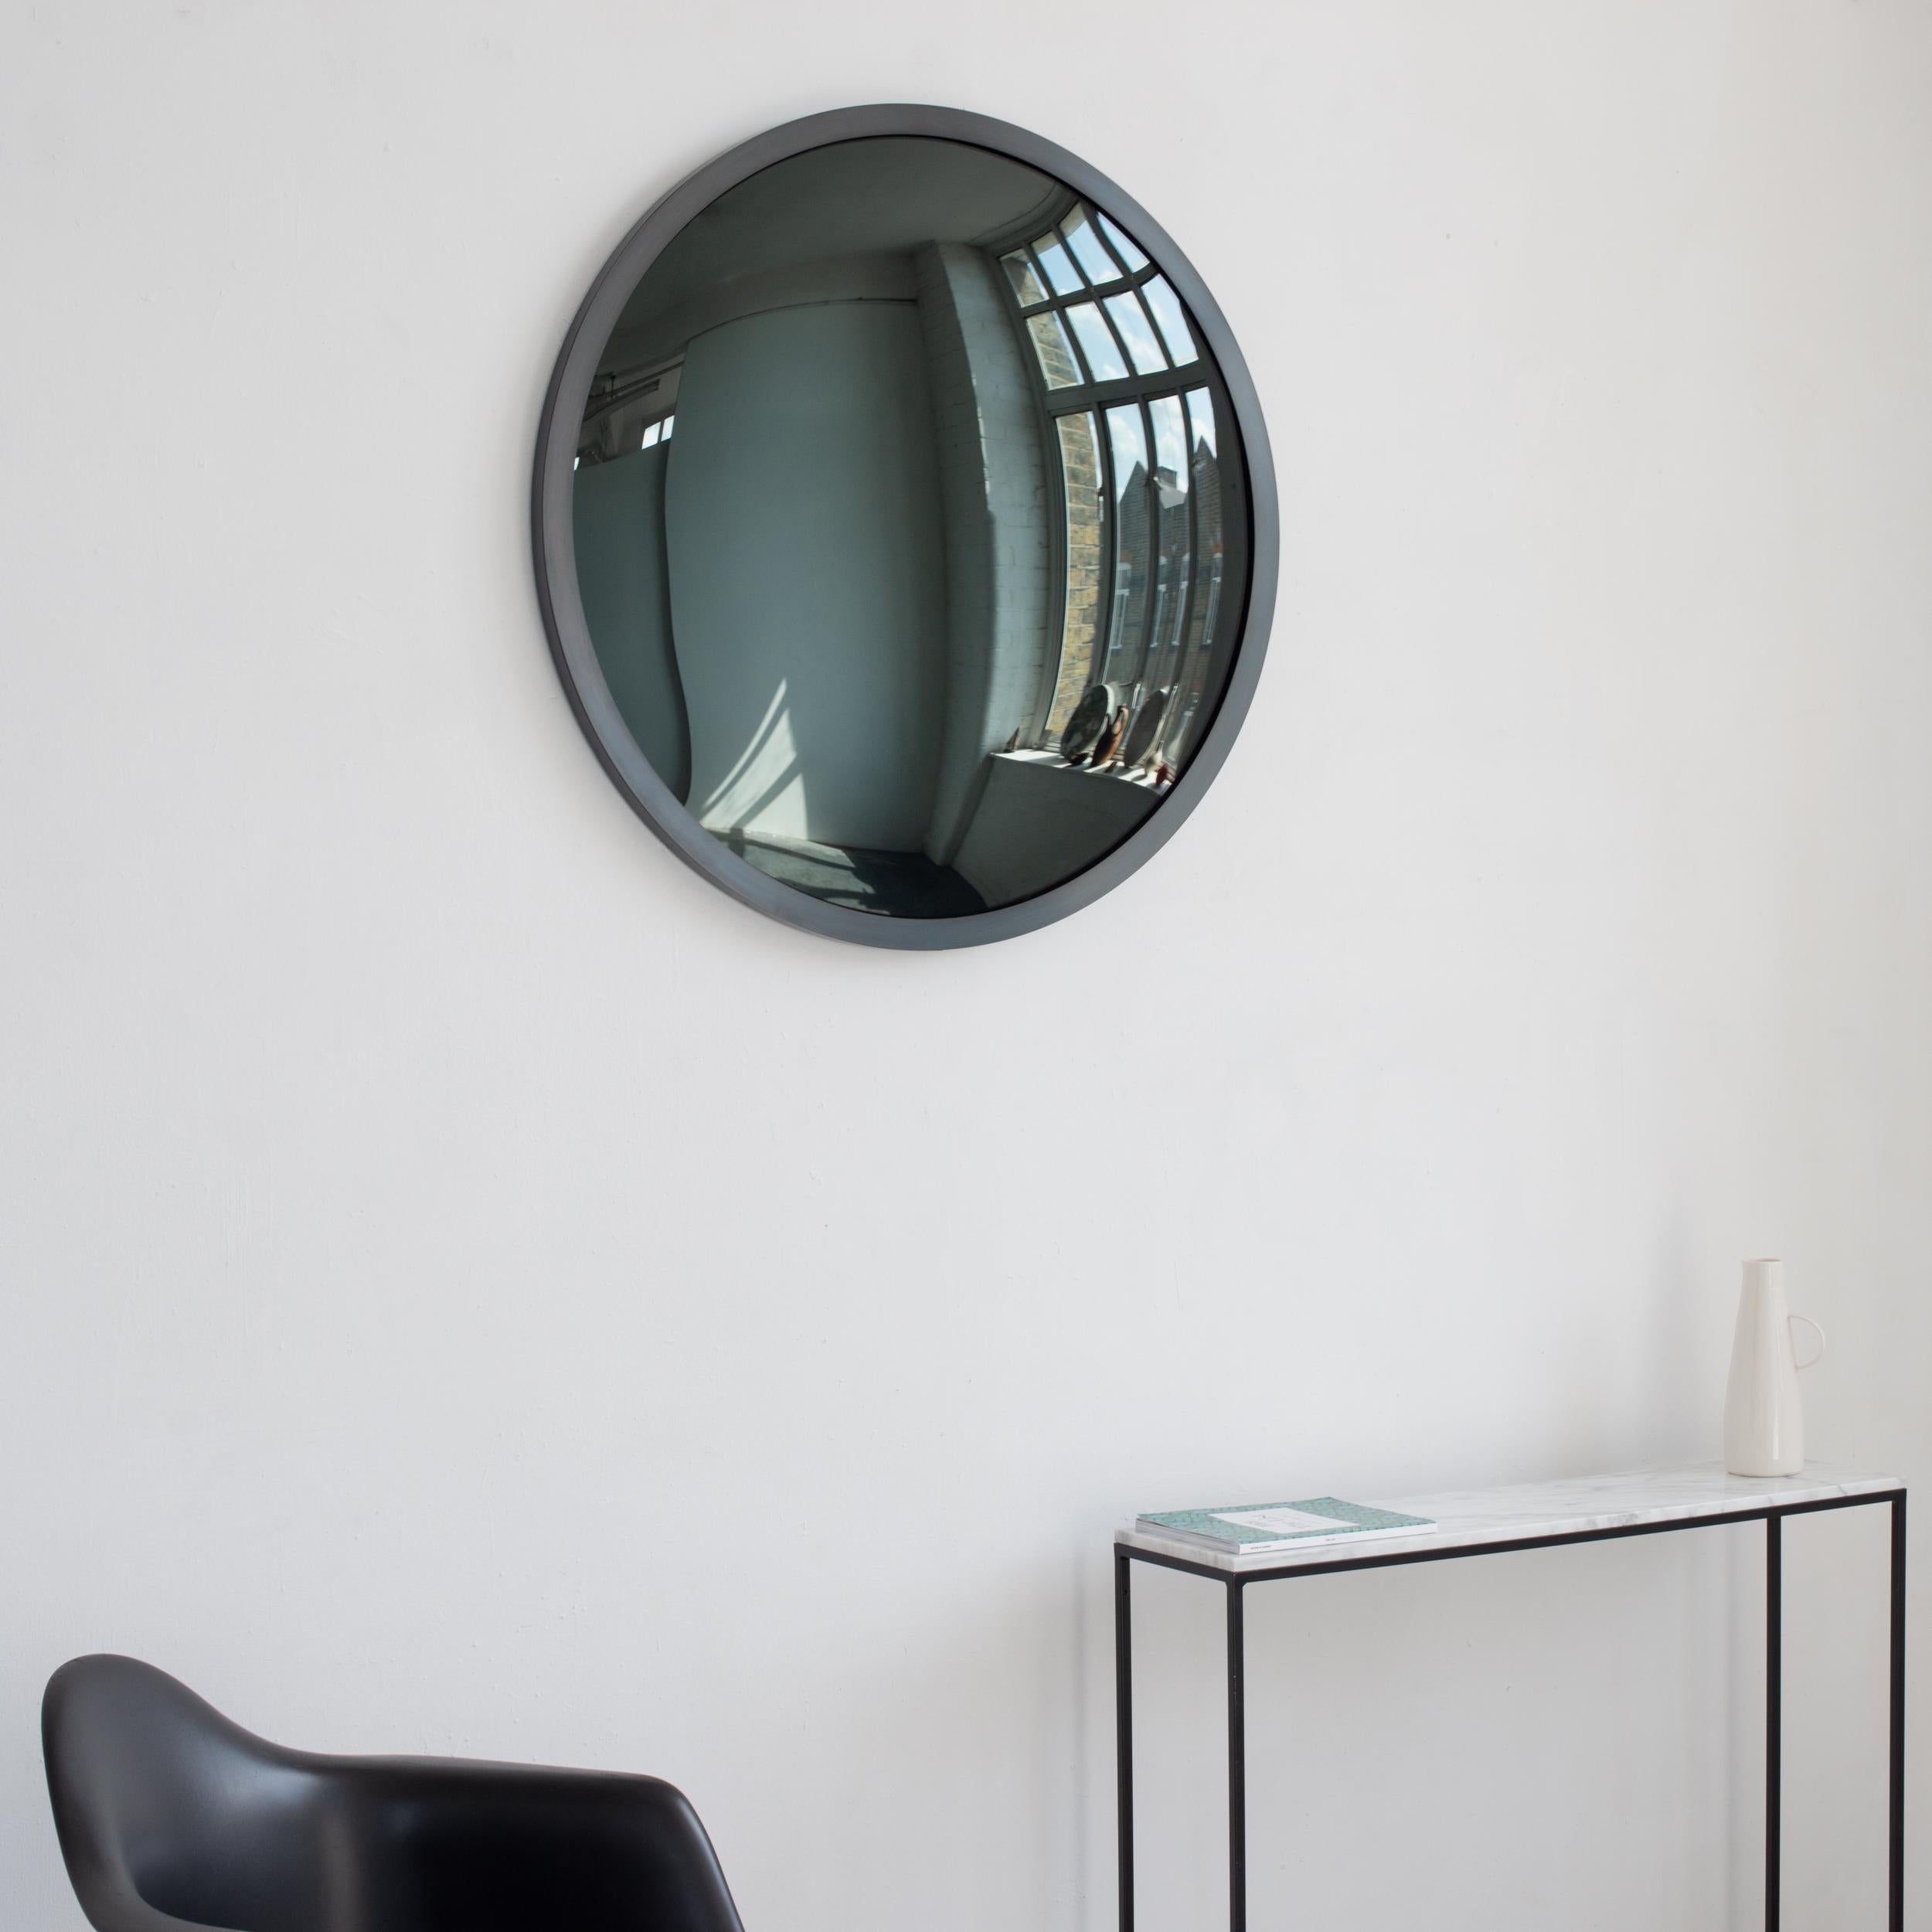 This mirror is available from stock.

Stunning convex black tinted mirror with a blackened metal full frame.

Each Orbis™ convex mirror is designed and handcrafted in London, UK. Slight variations in sizes and imperfections on edges and surface